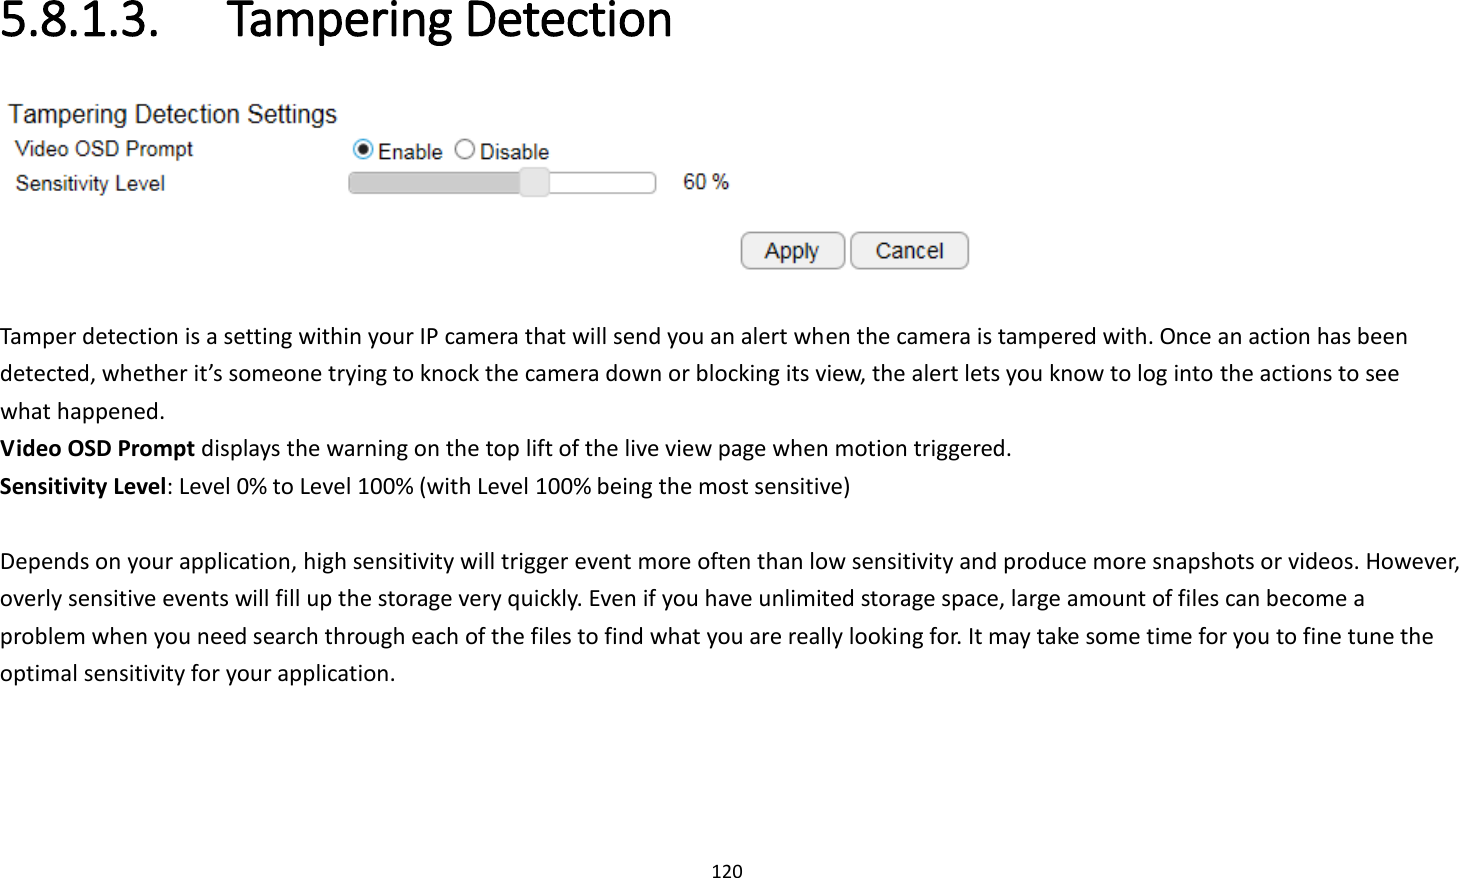 120  5.8.1.3.   Tampering Detection   Tamper detection is a setting within your IP camera that will send you an alert when the camera is tampered with. Once an action has been detected, whether it’s someone trying to knock the camera down or blocking its view, the alert lets you know to log into the actions to see what happened. Video OSD Prompt displays the warning on the top lift of the live view page when motion triggered. Sensitivity Level: Level 0% to Level 100% (with Level 100% being the most sensitive)  Depends on your application, high sensitivity will trigger event more often than low sensitivity and produce more snapshots or videos. However, overly sensitive events will fill up the storage very quickly. Even if you have unlimited storage space, large amount of files can become a problem when you need search through each of the files to find what you are really looking for. It may take some time for you to fine tune the optimal sensitivity for your application.   